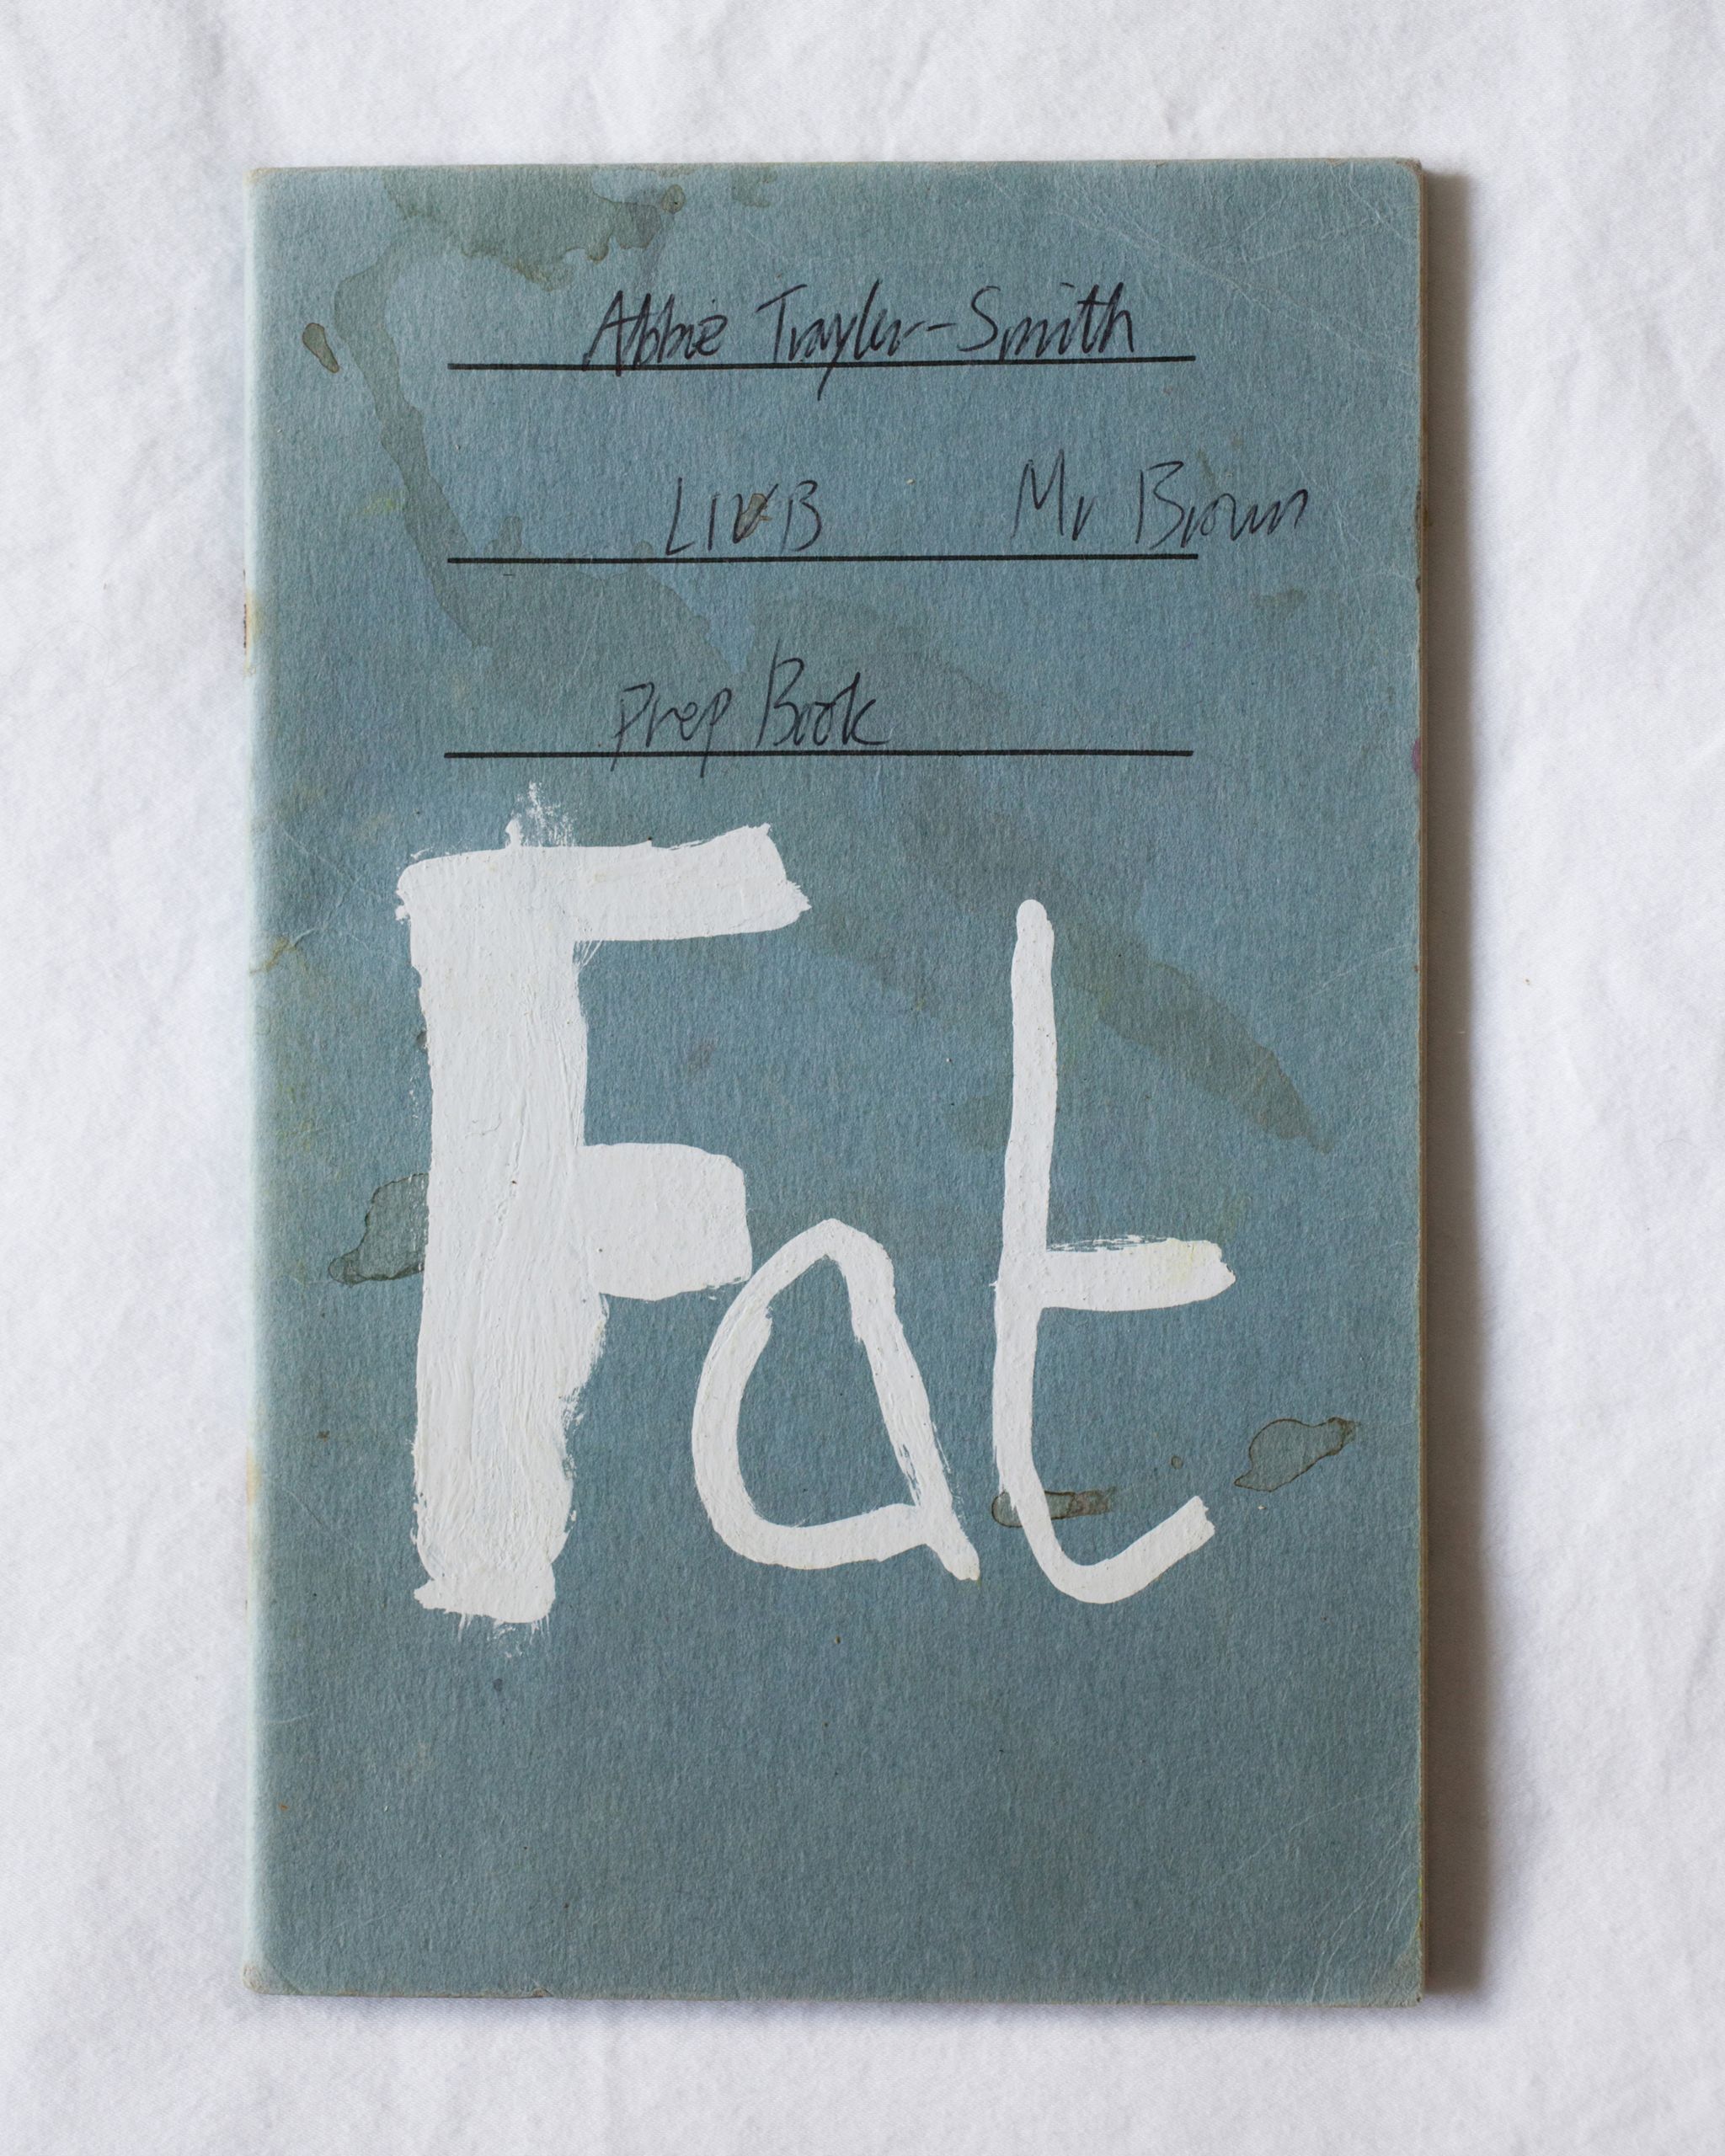 Photographer Abbie wrote the word 'FAT' in Tipp-Ex on her school book when she was an overweight schoolgirl